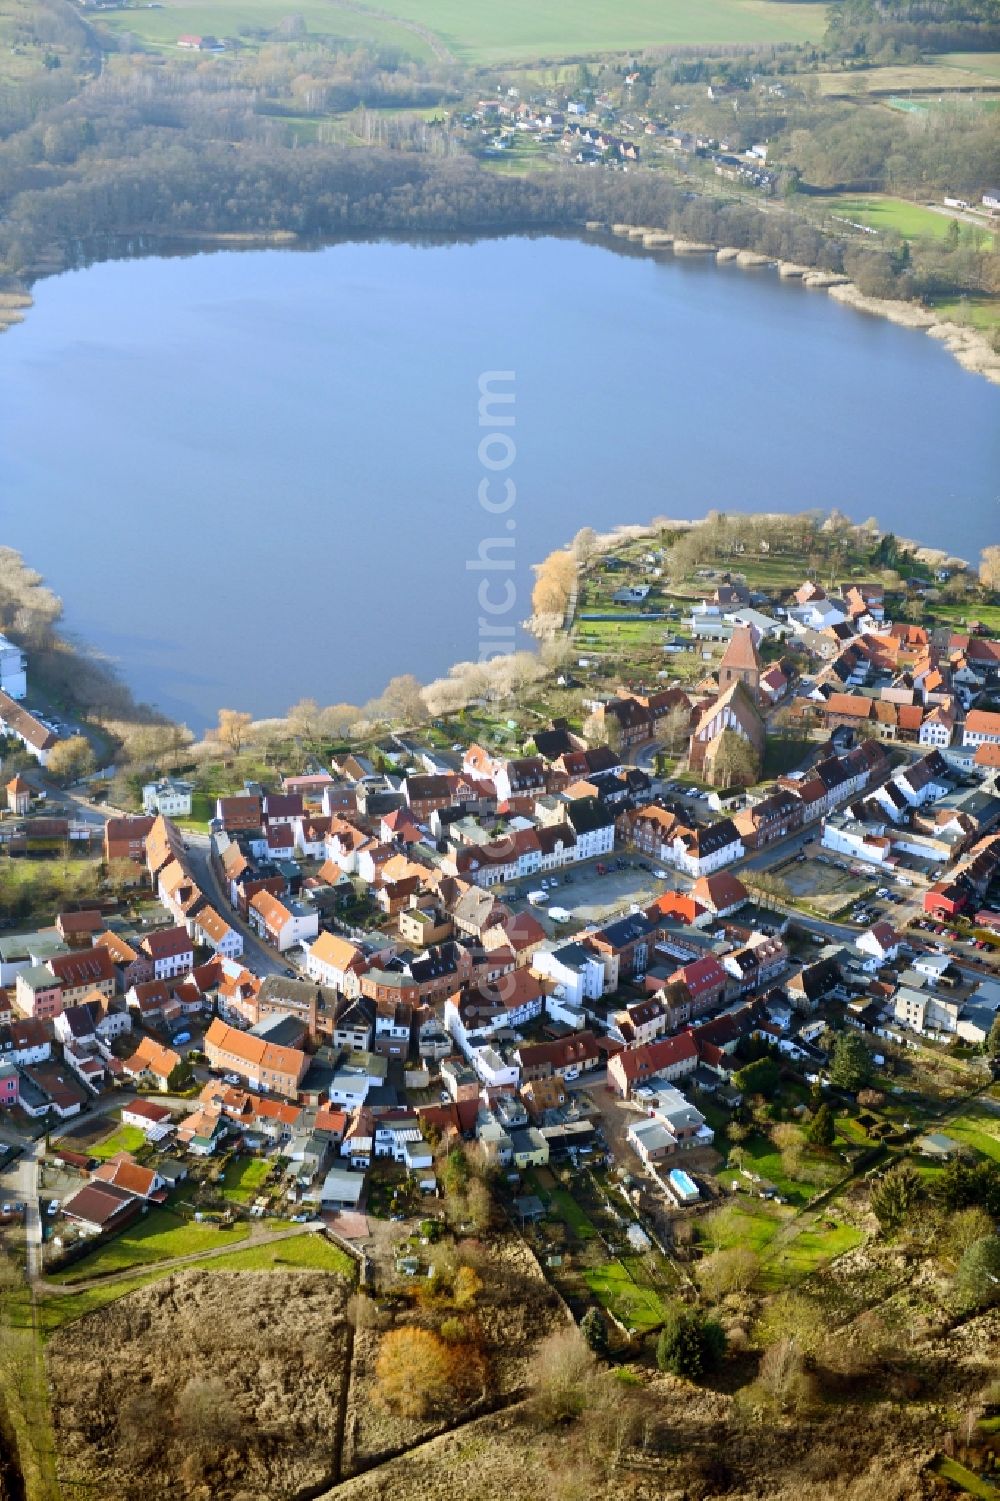 Crivitz from the bird's eye view: Village on the banks of the area on Crivitzer See in Crivitz in the state Mecklenburg - Western Pomerania, Germany